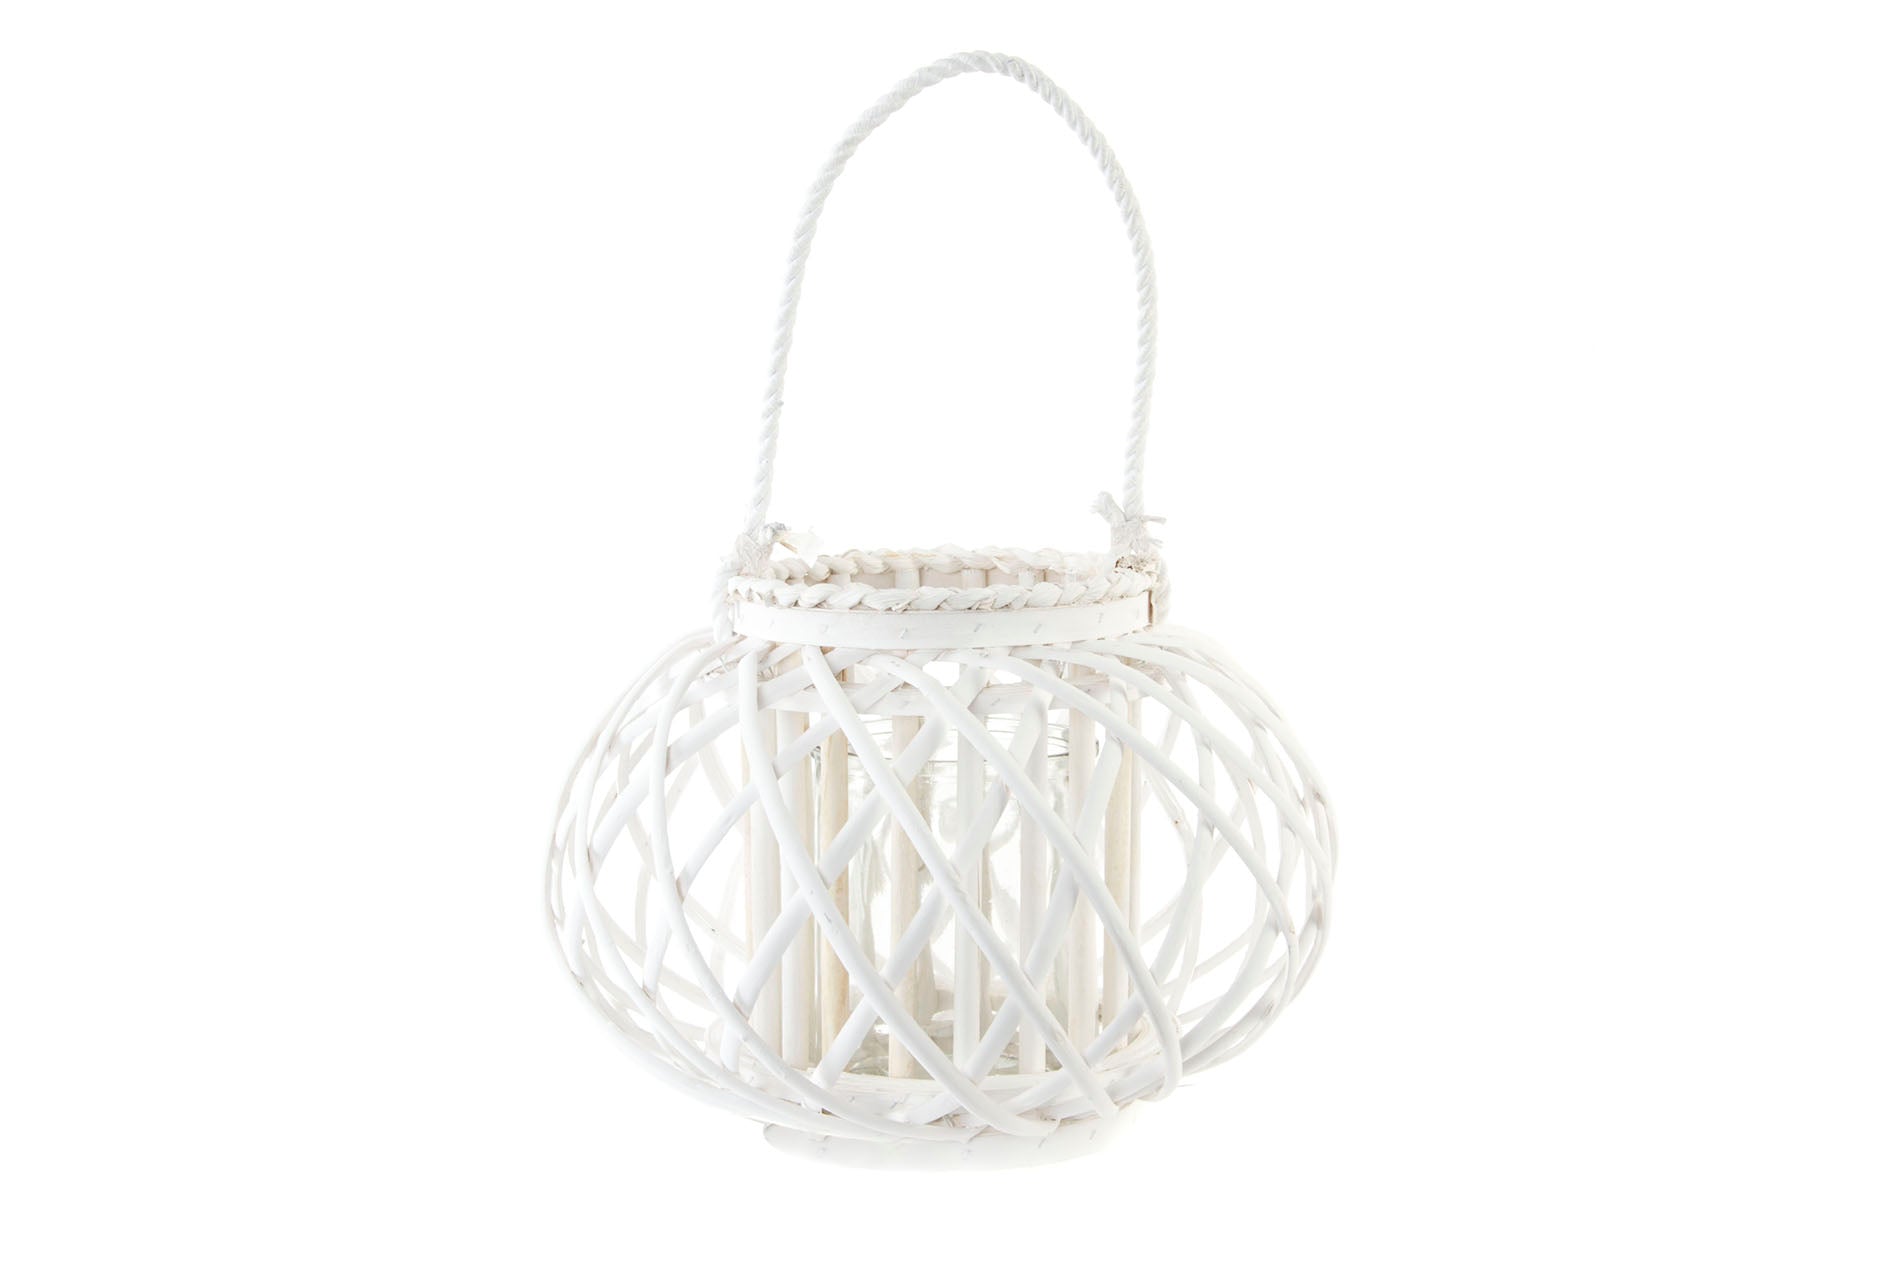 Wicker Candle Holder with glass in white